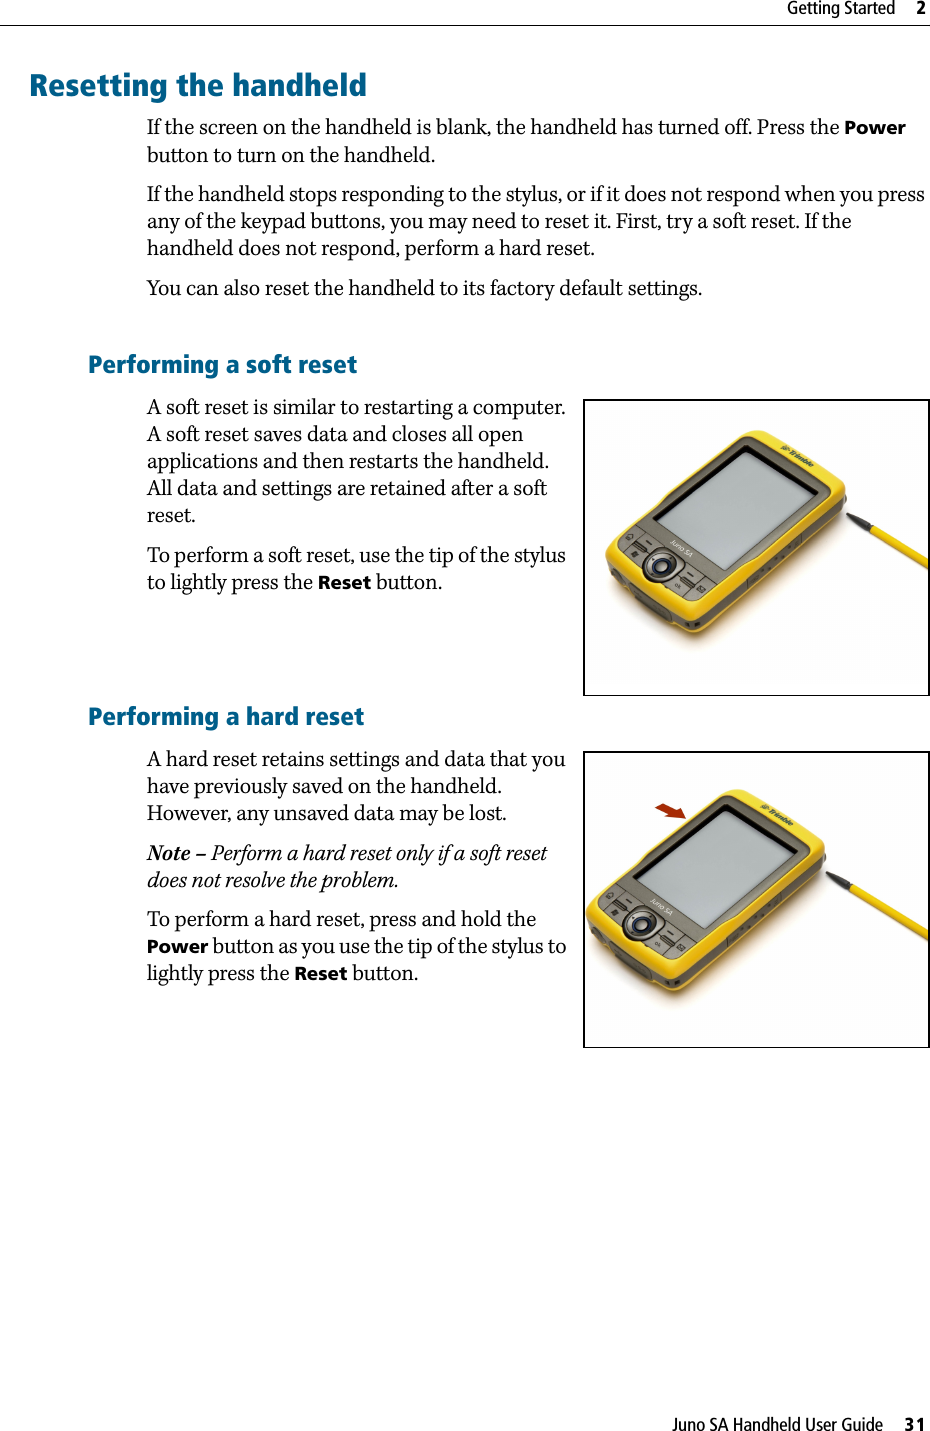 Juno SA Handheld User Guide     31Getting Started     2Resetting the handheldIf the screen on the handheld is blank, the handheld has turned off. Press the Power button to turn on the handheld.If the handheld stops responding to the stylus, or if it does not respond when you press any of the keypad buttons, you may need to reset it. First, try a soft reset. If the handheld does not respond, perform a hard reset.You can also reset the handheld to its factory default settings.Performing a soft resetA soft reset is similar to restarting a computer. A soft reset saves data and closes all open applications and then restarts the handheld. All data and settings are retained after a soft reset.To perform a soft reset, use the tip of the stylus to lightly press the Reset button.Performing a hard resetA hard reset retains settings and data that you have previously saved on the handheld. However, any unsaved data may be lost.Note – Perform a hard reset only if a soft reset does not resolve the problem.To perform a hard reset, press and hold the Power button as you use the tip of the stylus to lightly press the Reset button.